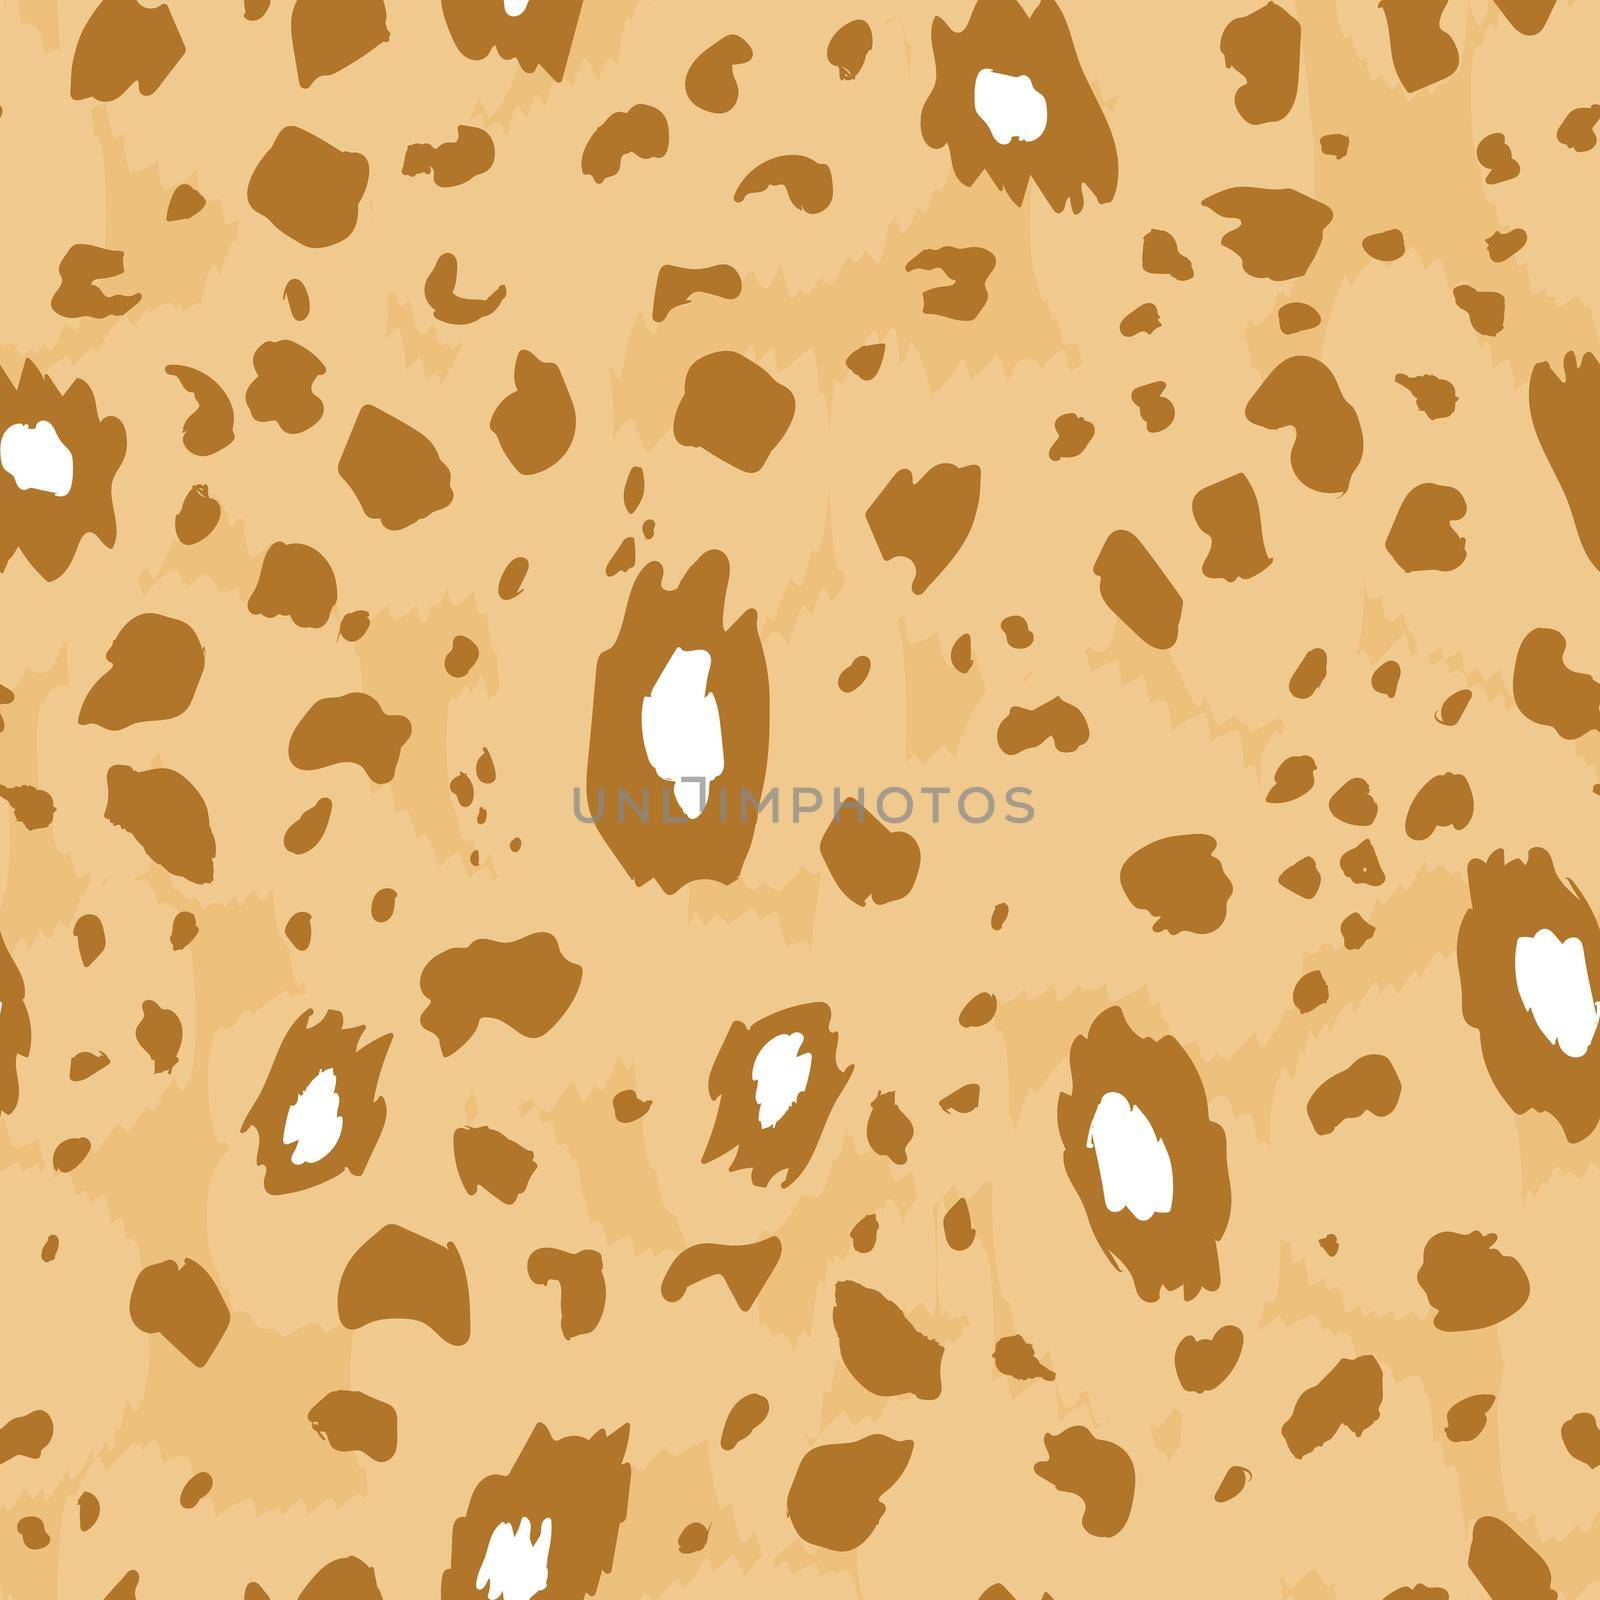 Abstract modern leopard seamless pattern. Animals trendy background. Brown and beige decorative vector stock illustration for print, card, postcard, fabric, textile. Modern ornament of stylized skin by allaku